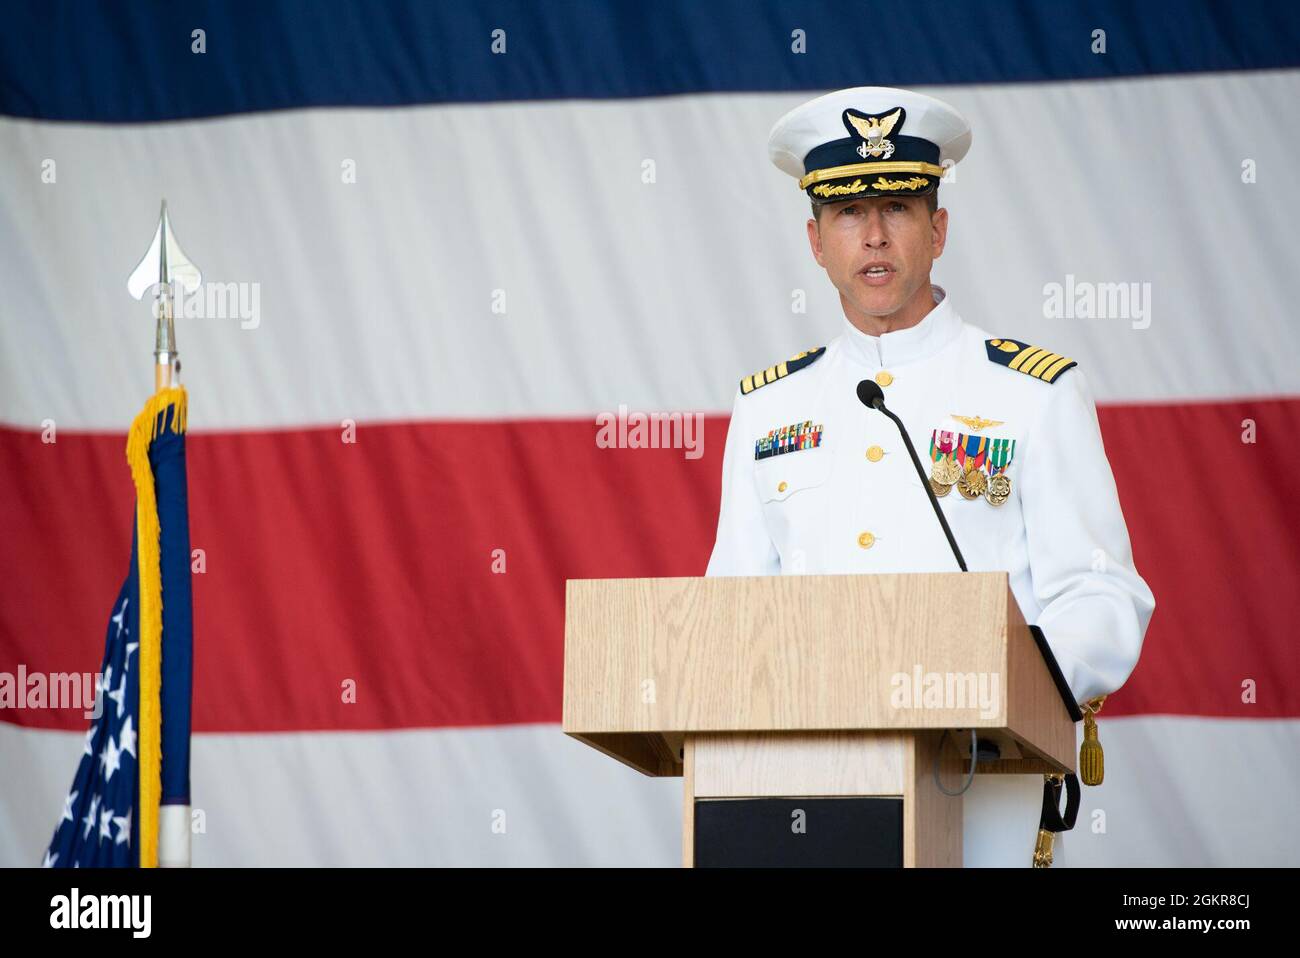 Coast Guard Capt. Hans Govertsen, incoming commanding officer of Sector/Air Station Corpus Christi, addresses the audience at the unit's change-of-command ceremony, June 18, 2021, in Corpus Christi, Texas. During the ceremony, Capt.